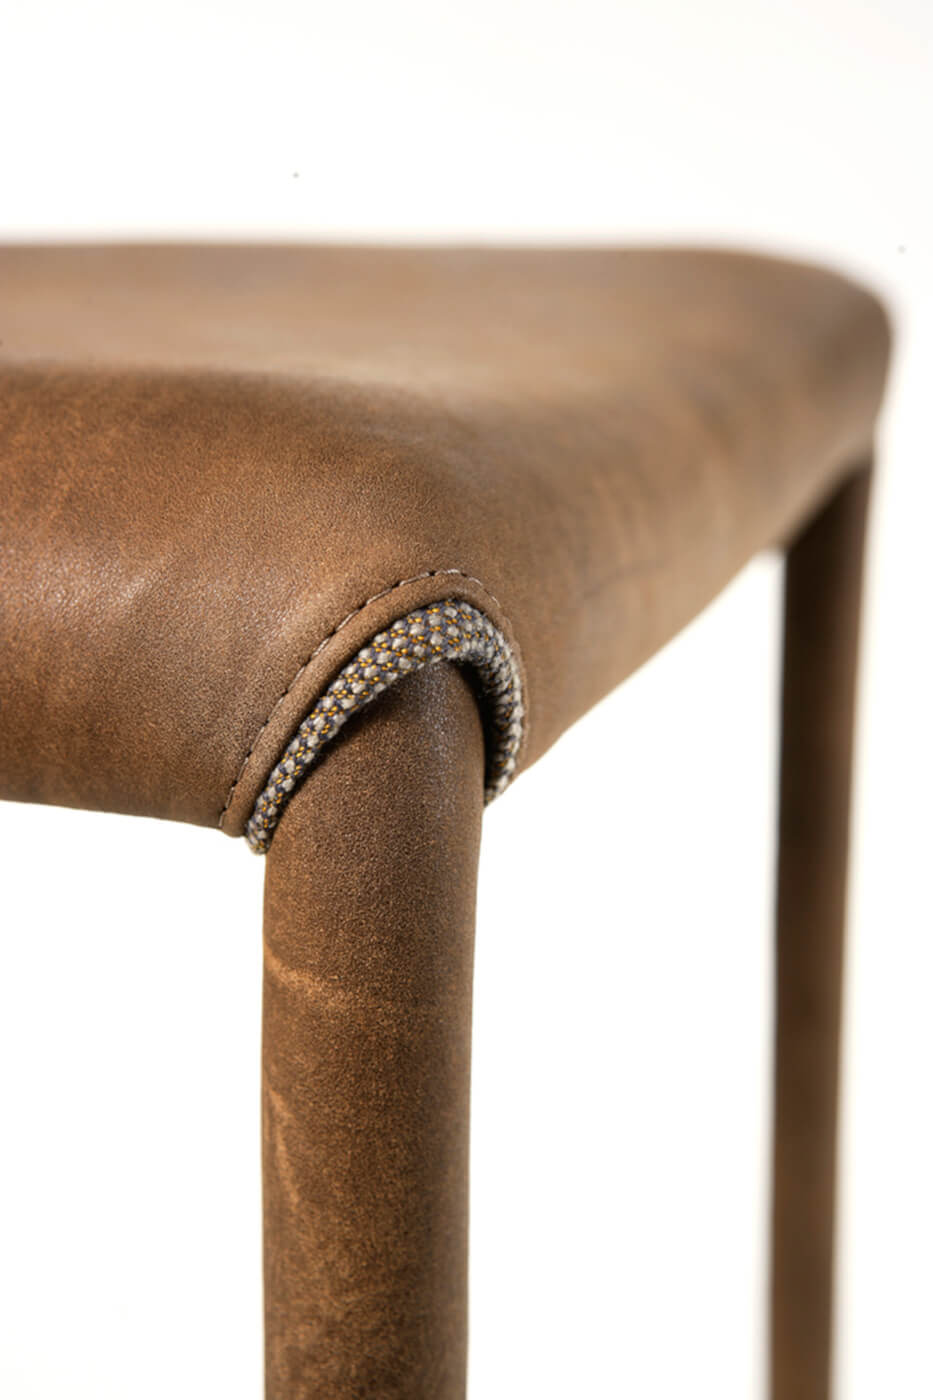 Nuvola stool detail with seat and structure covered in brown leather